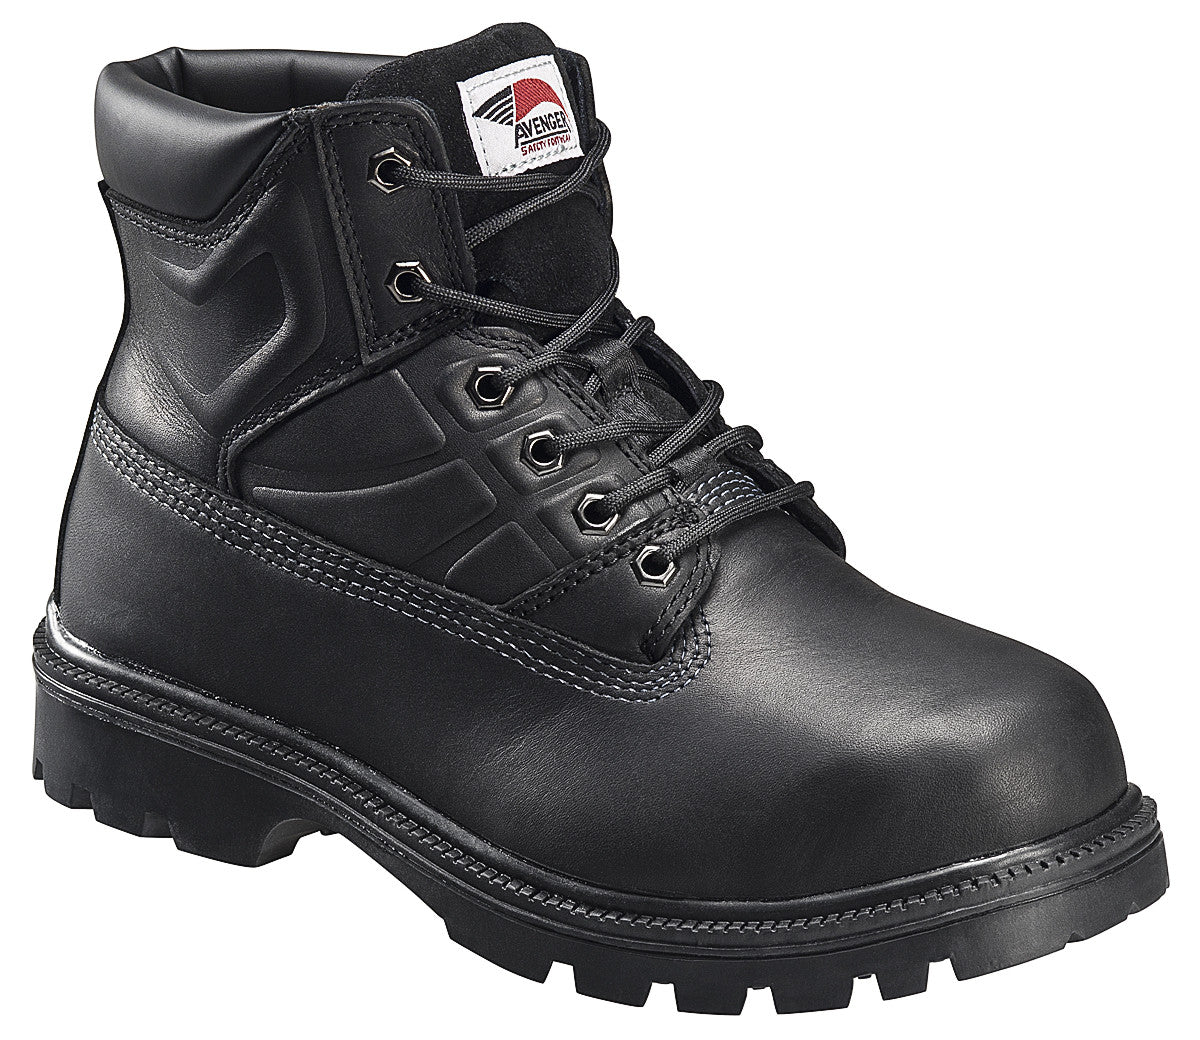 Leather Safety Toe EH Internal Met Guard High Heat Outsole Work Boot